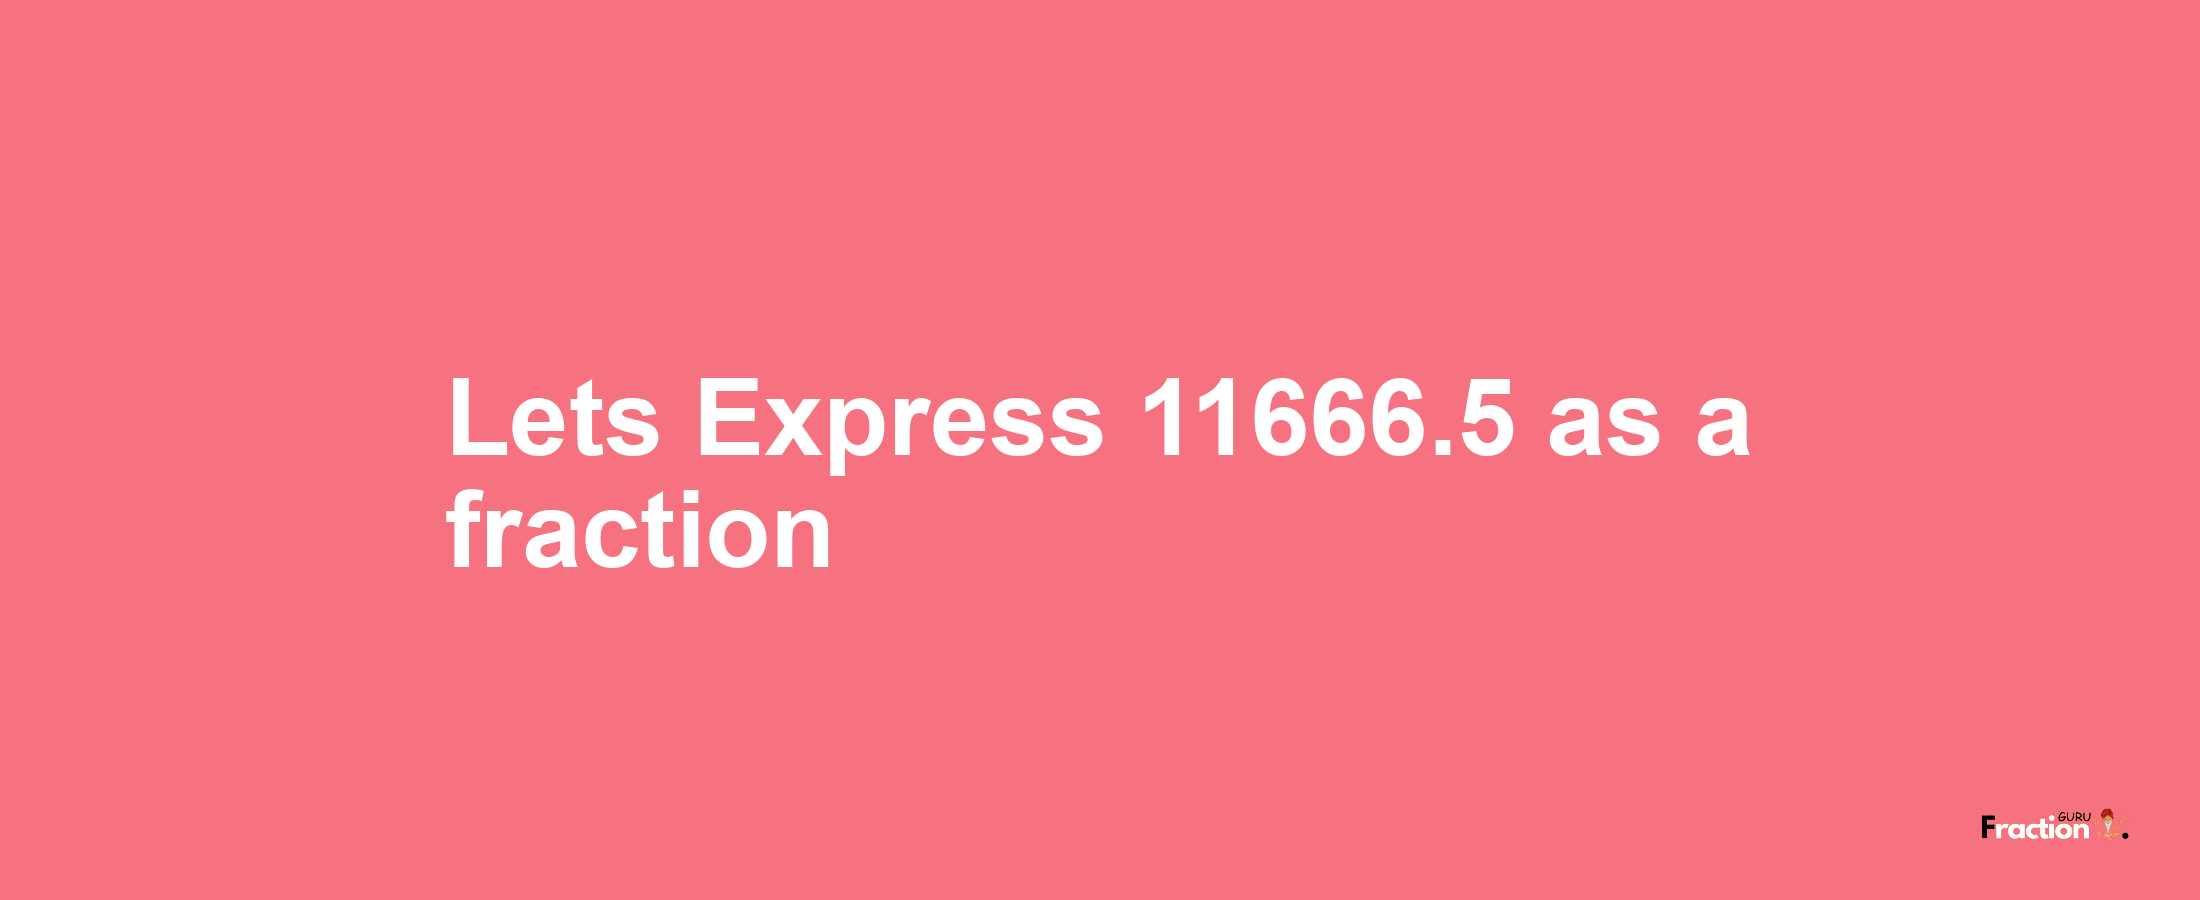 Lets Express 11666.5 as afraction